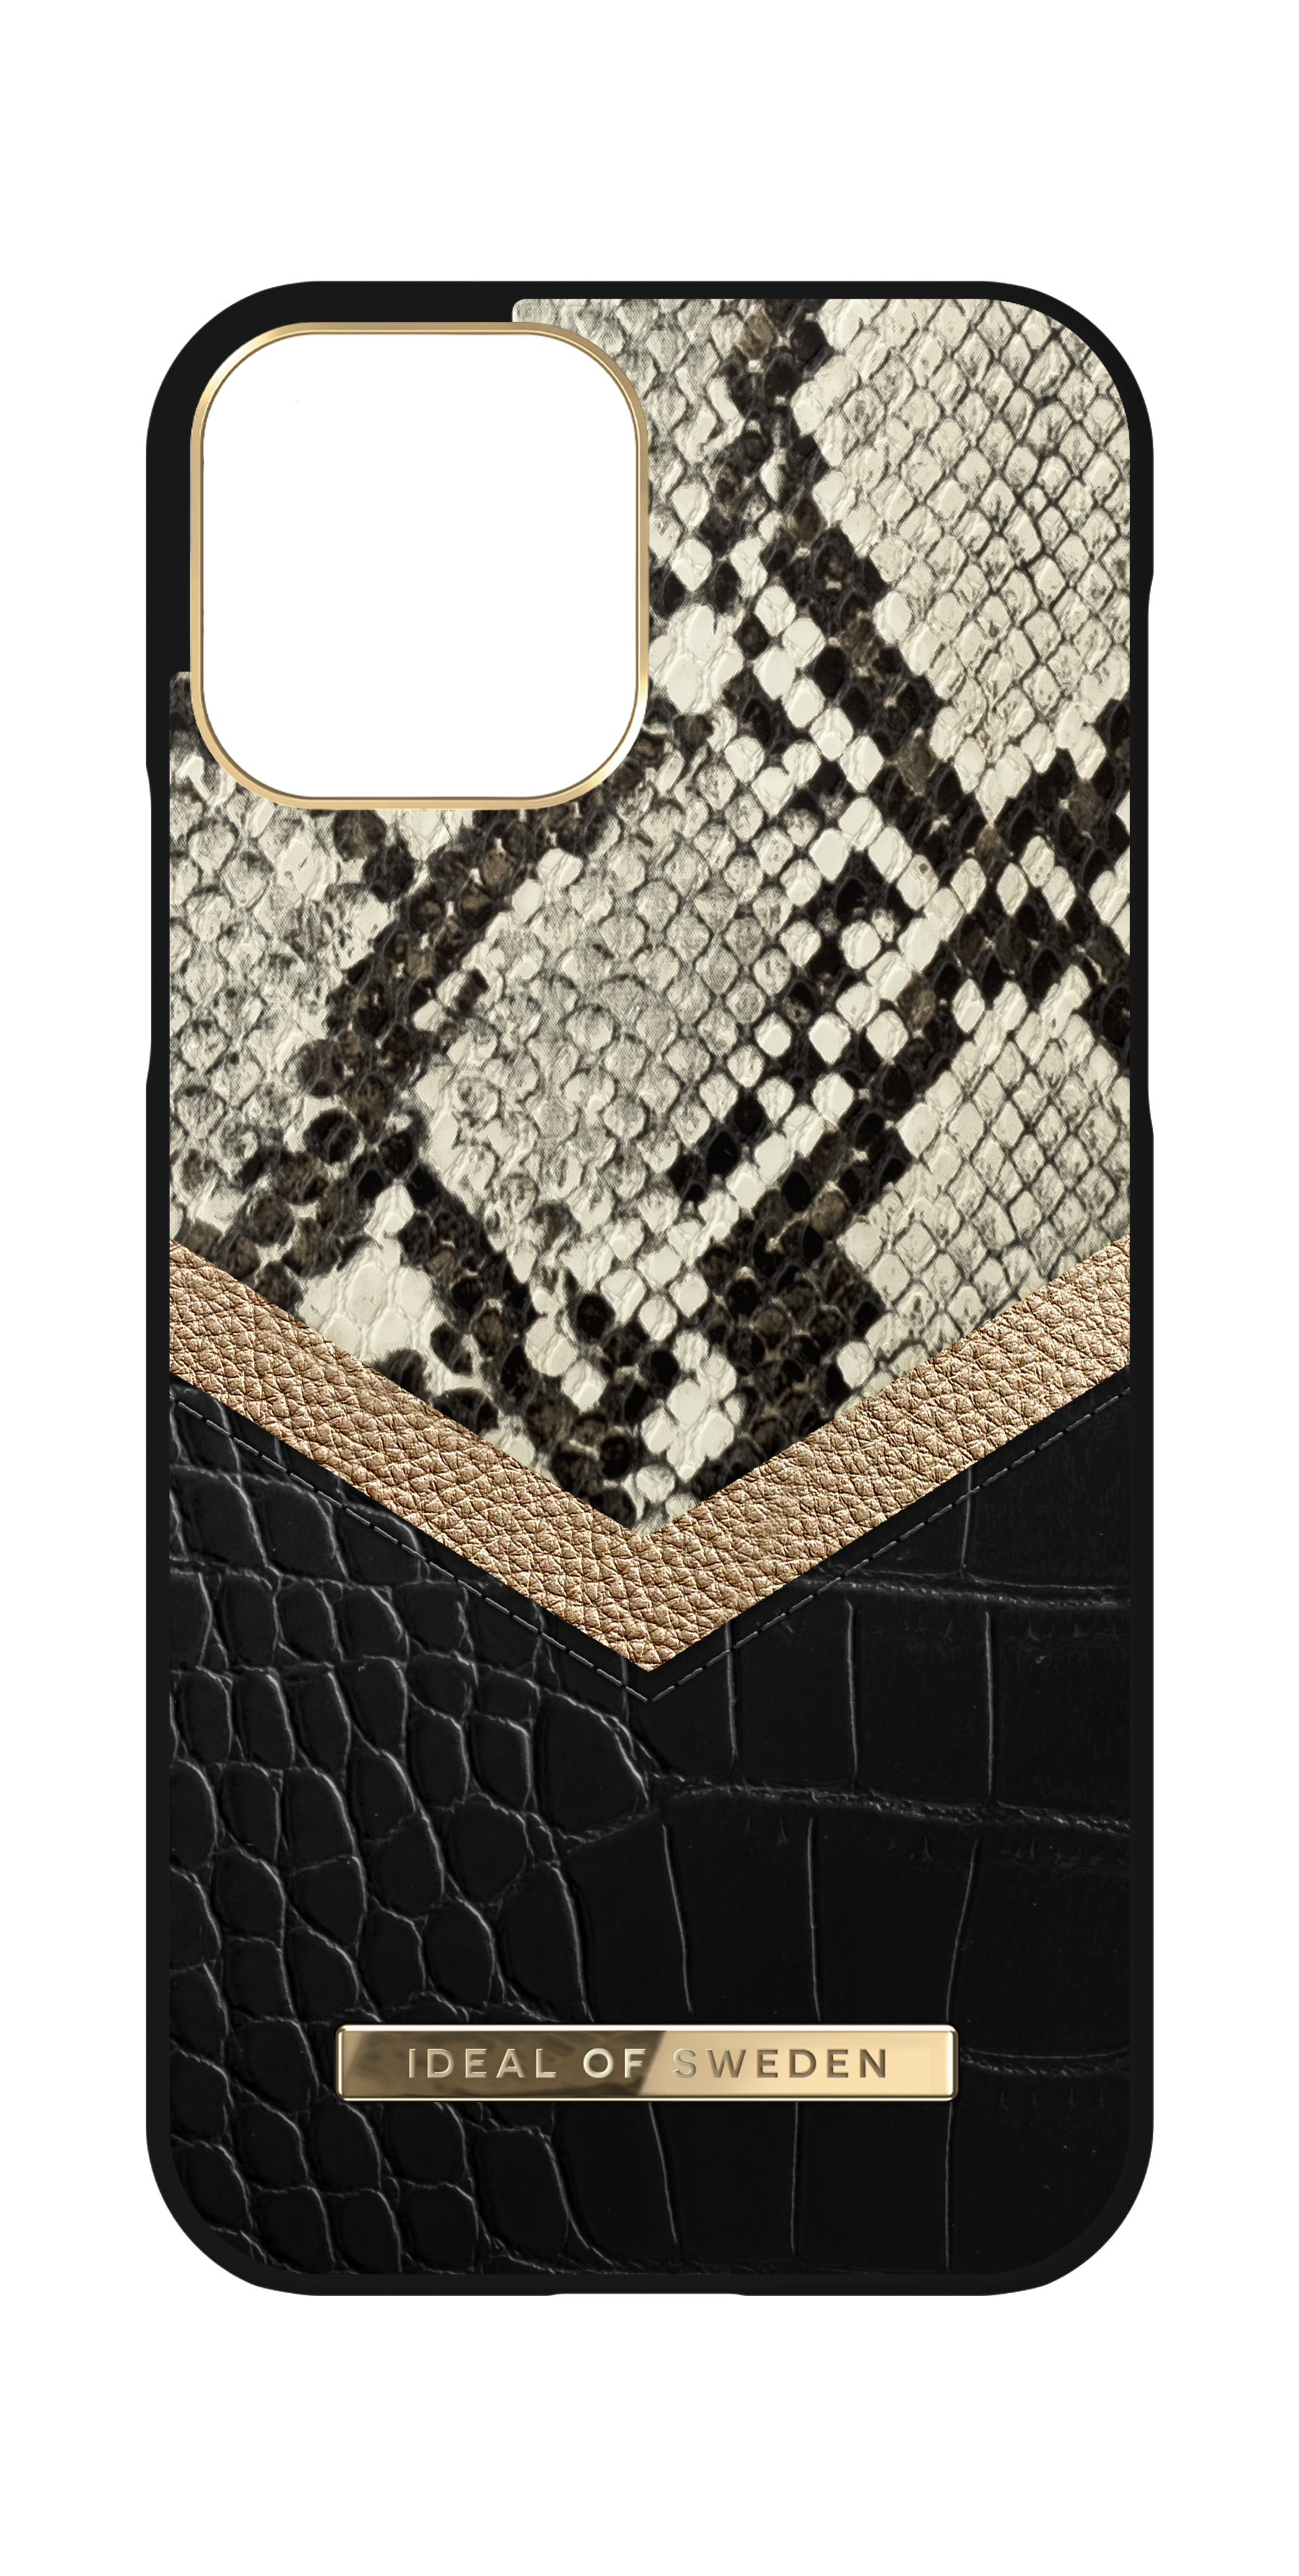 iDeal of Sweden ATELIER Apple iPhone 12 Pro Max Case - Fashionable Swedish Design Textured Leather iPhone Back Cover, Snake and Croco, Wireless Charging Compatible - Midnight Python